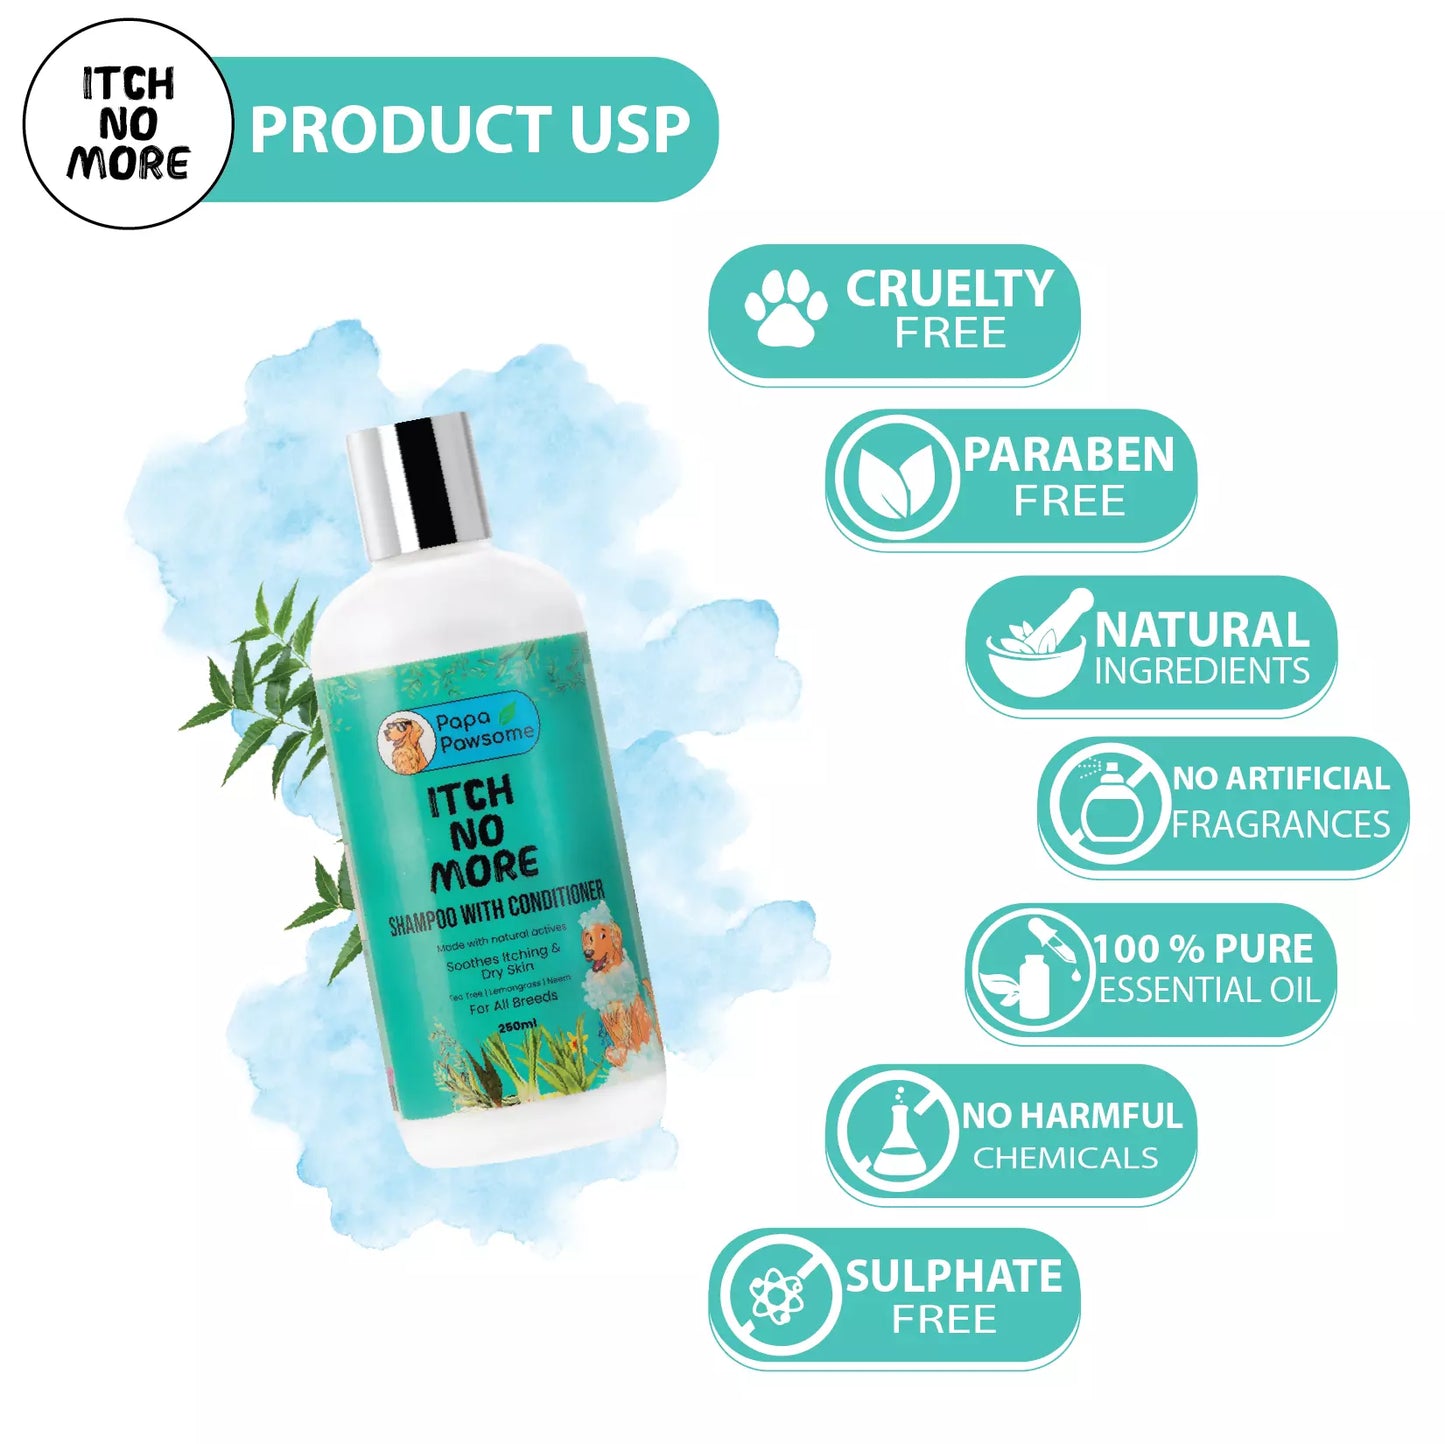 Itch No More Shampoo with Conditioner 250 ml (PACK OF 2) + Free PAW CREAM